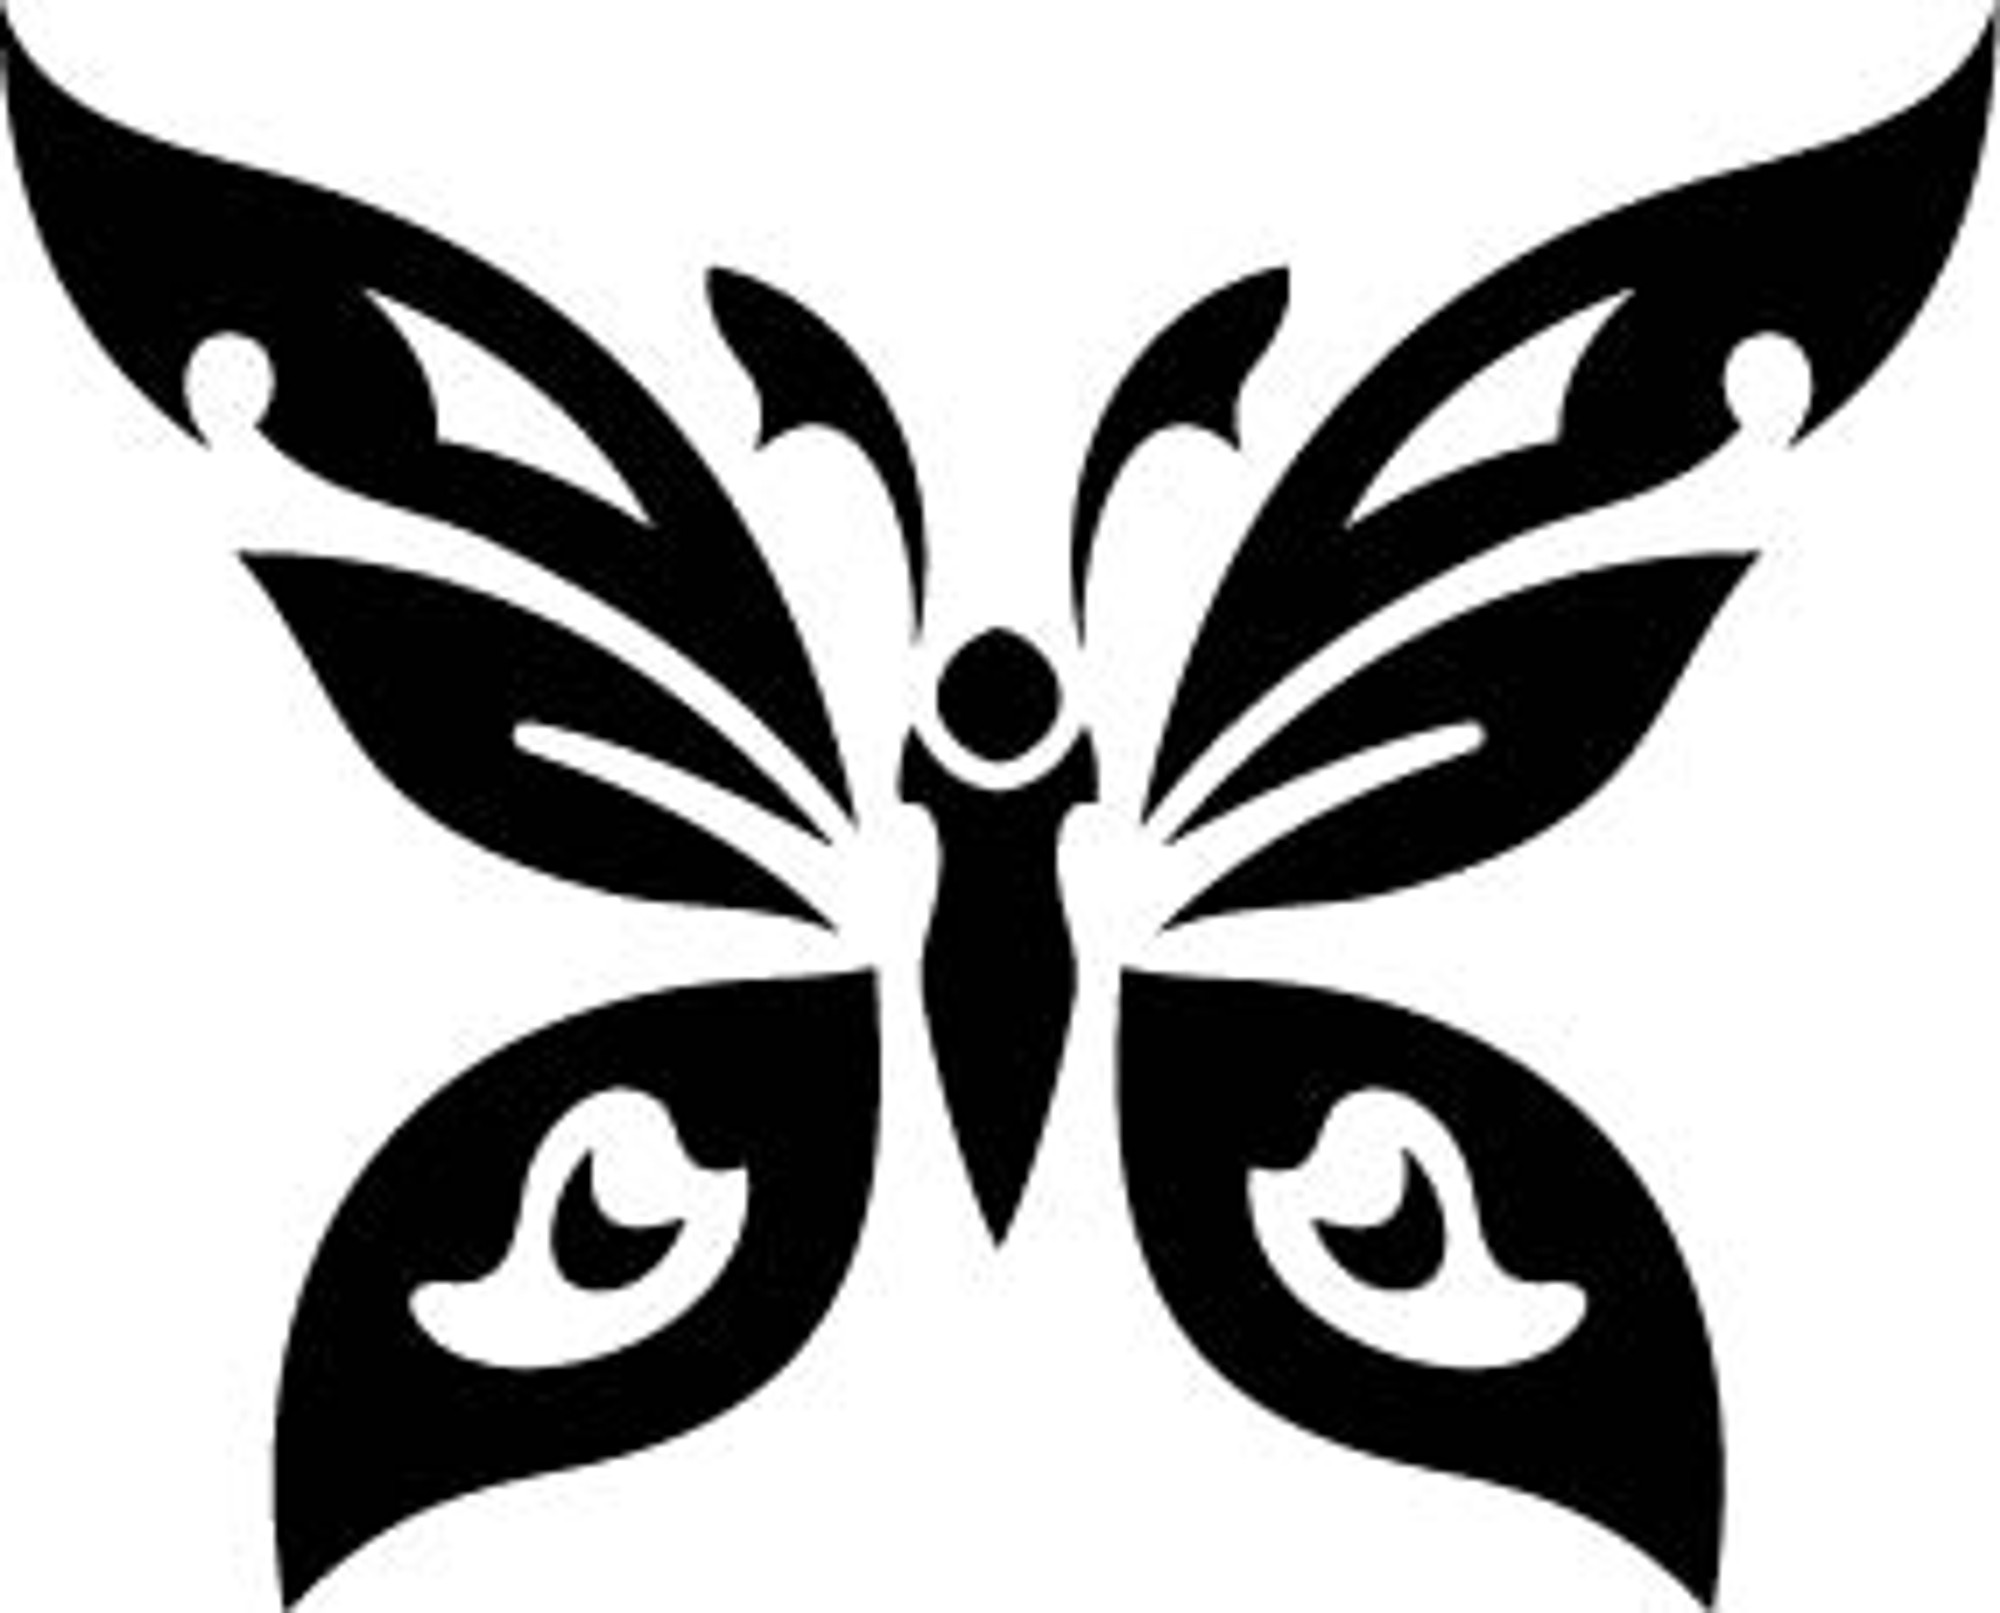 Insect Car Decals - Car Stickers | Butterfly Car Decal 03 | AnyDecals.com